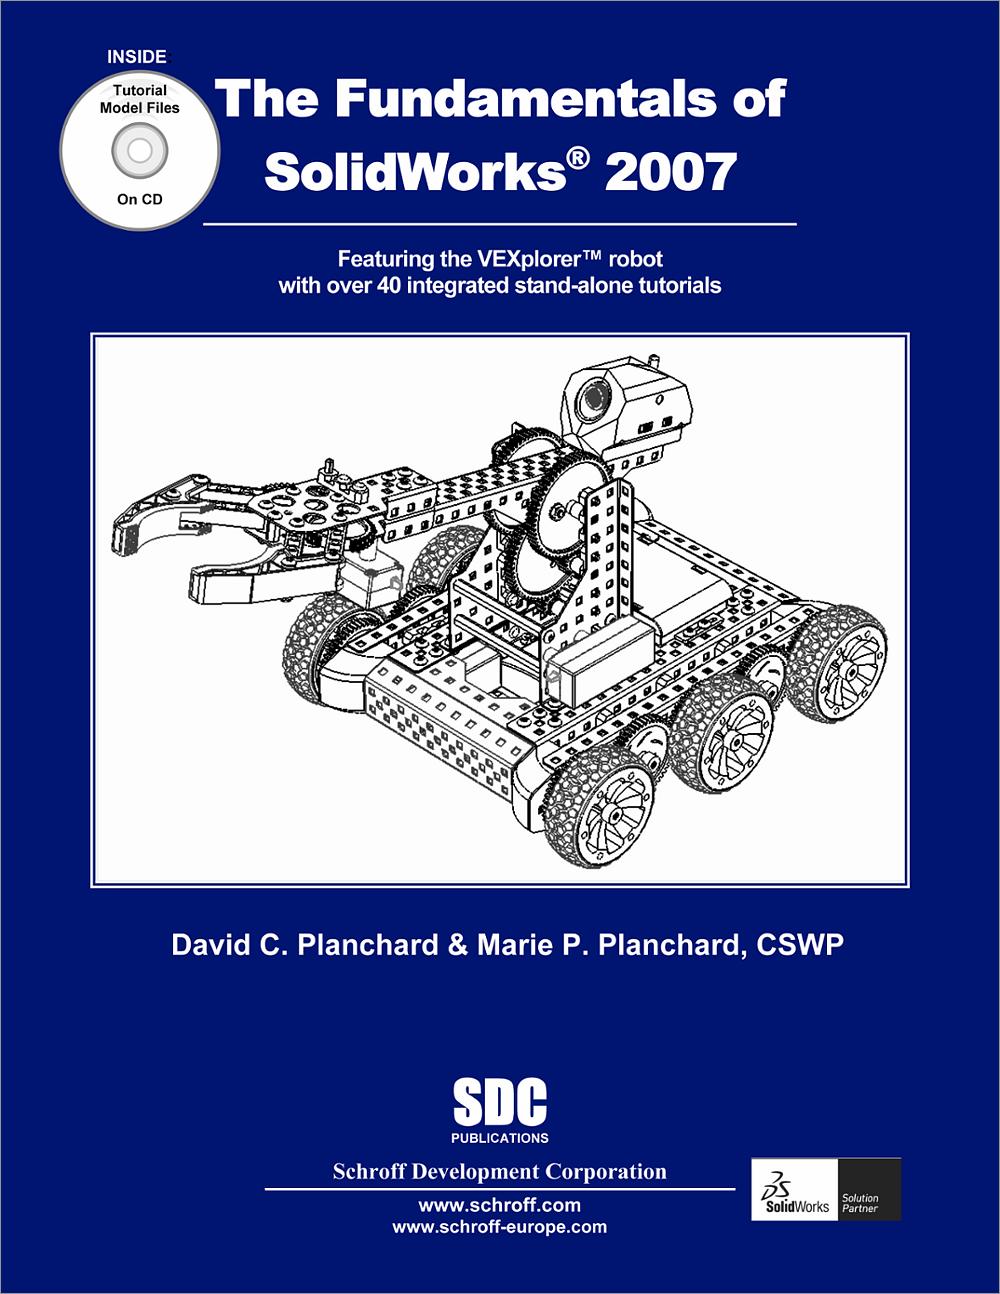 solidworks 2007 real download